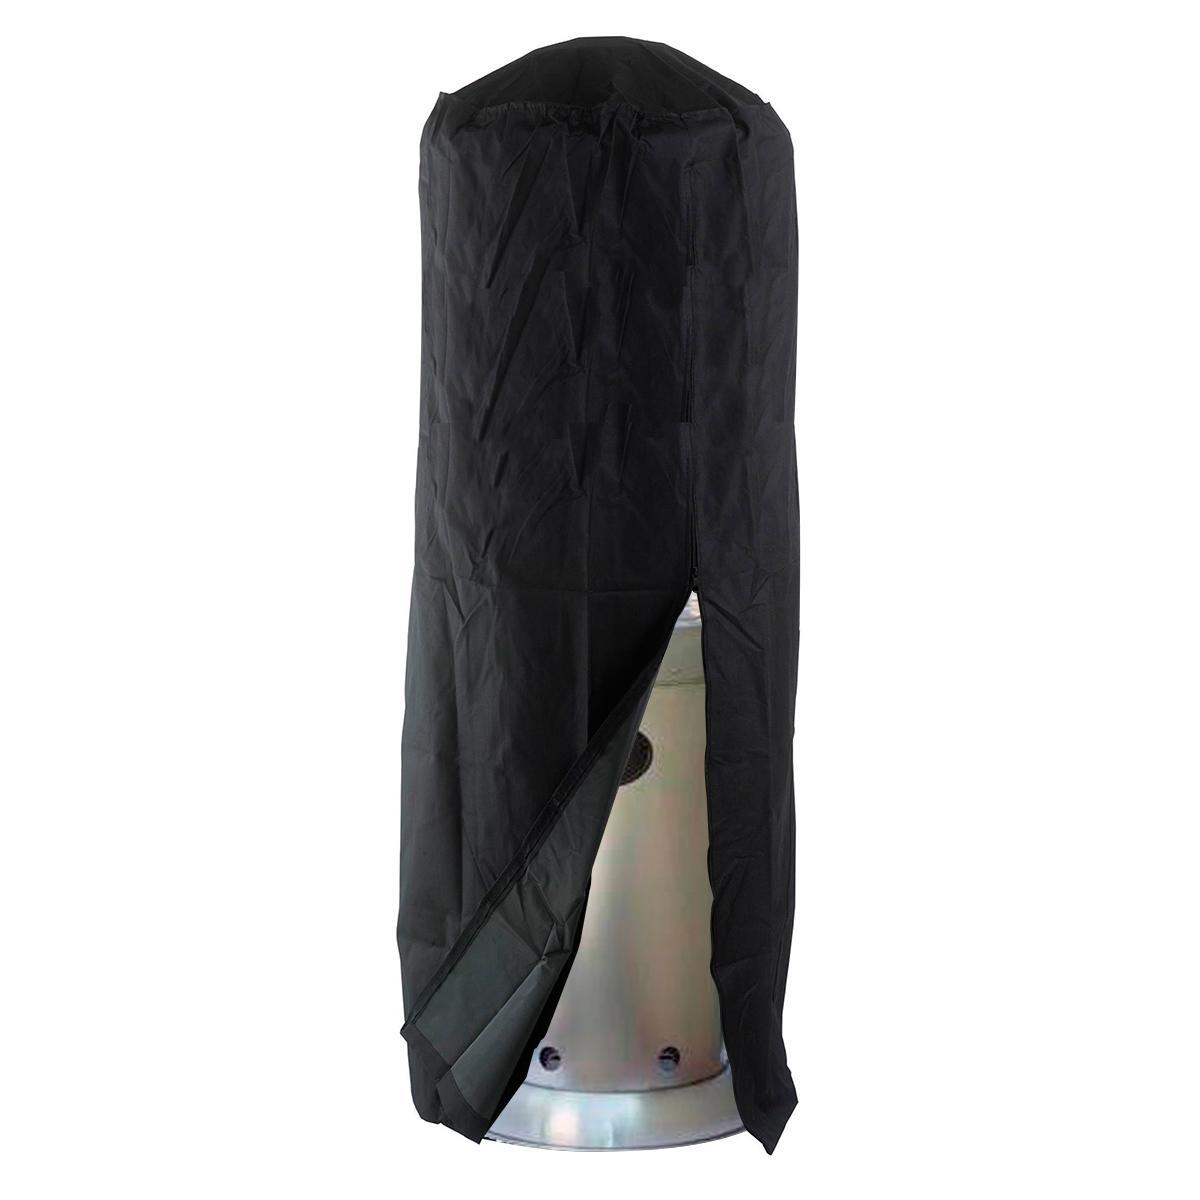 Patio Heater Covers from Heat Outdoors